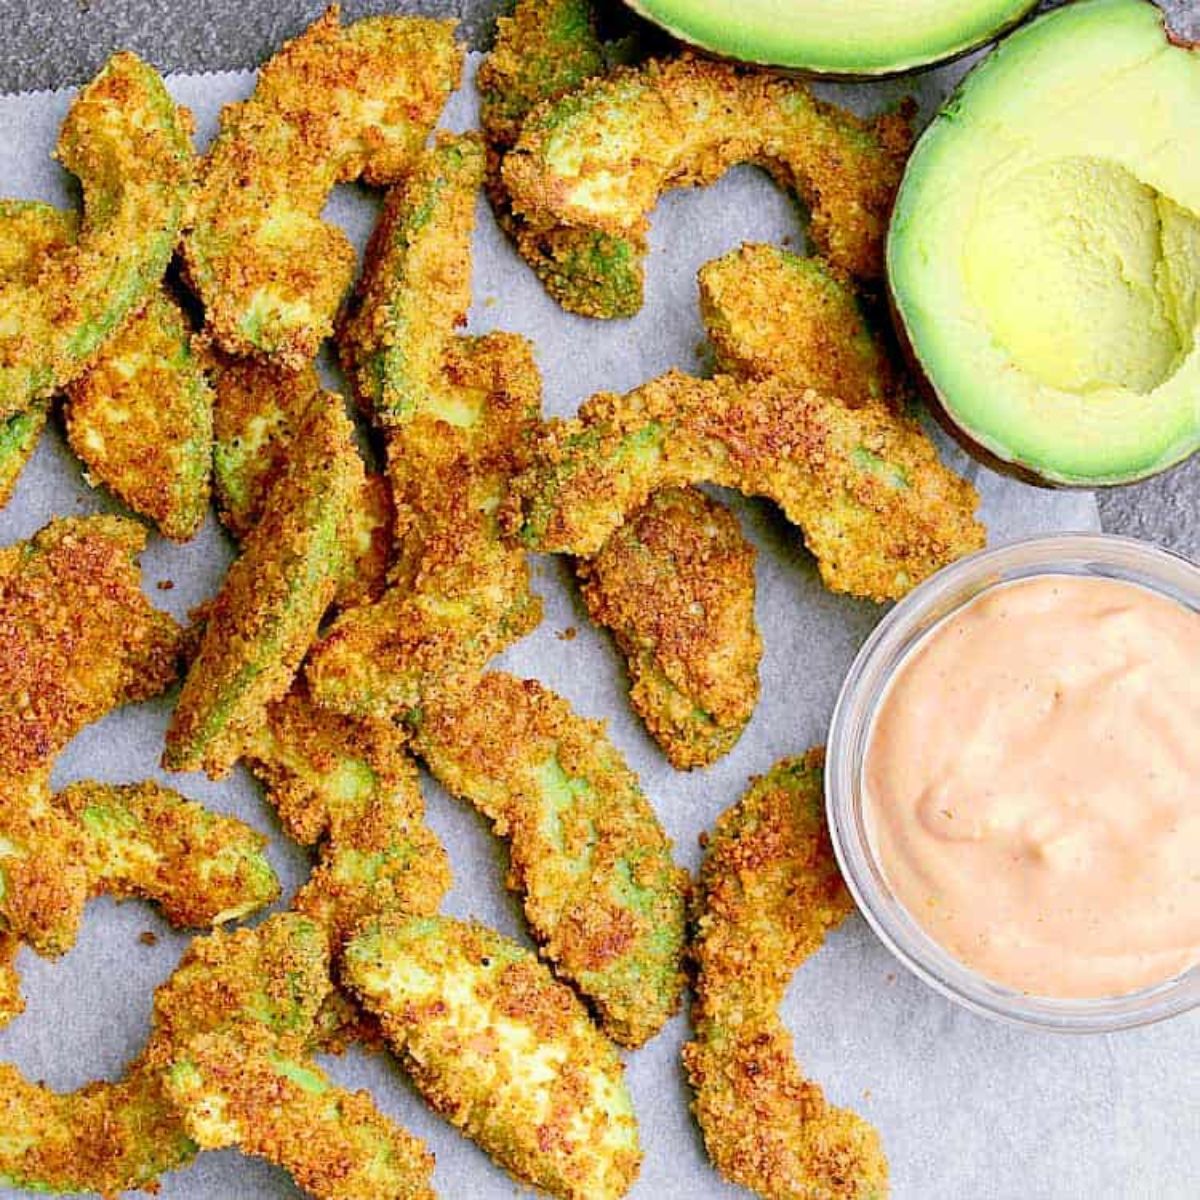 On a sheet of baking parchment are avocado fries. To the right is a glass pot of a pink dip and above are two avocado halves